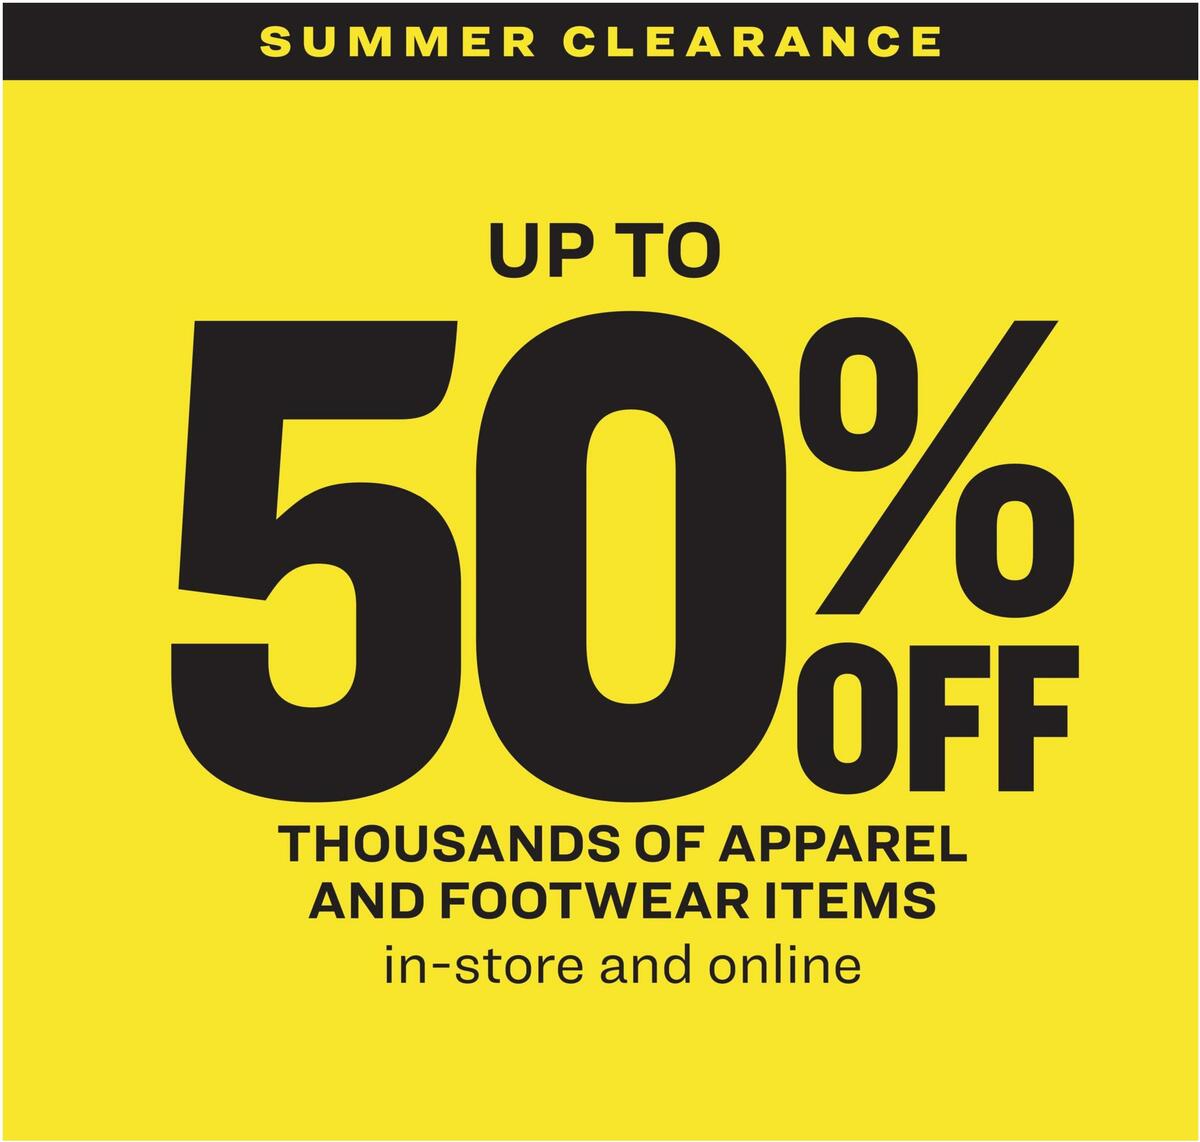 Academy Sports + Outdoors Sports Ad Weekly Ad from June 22